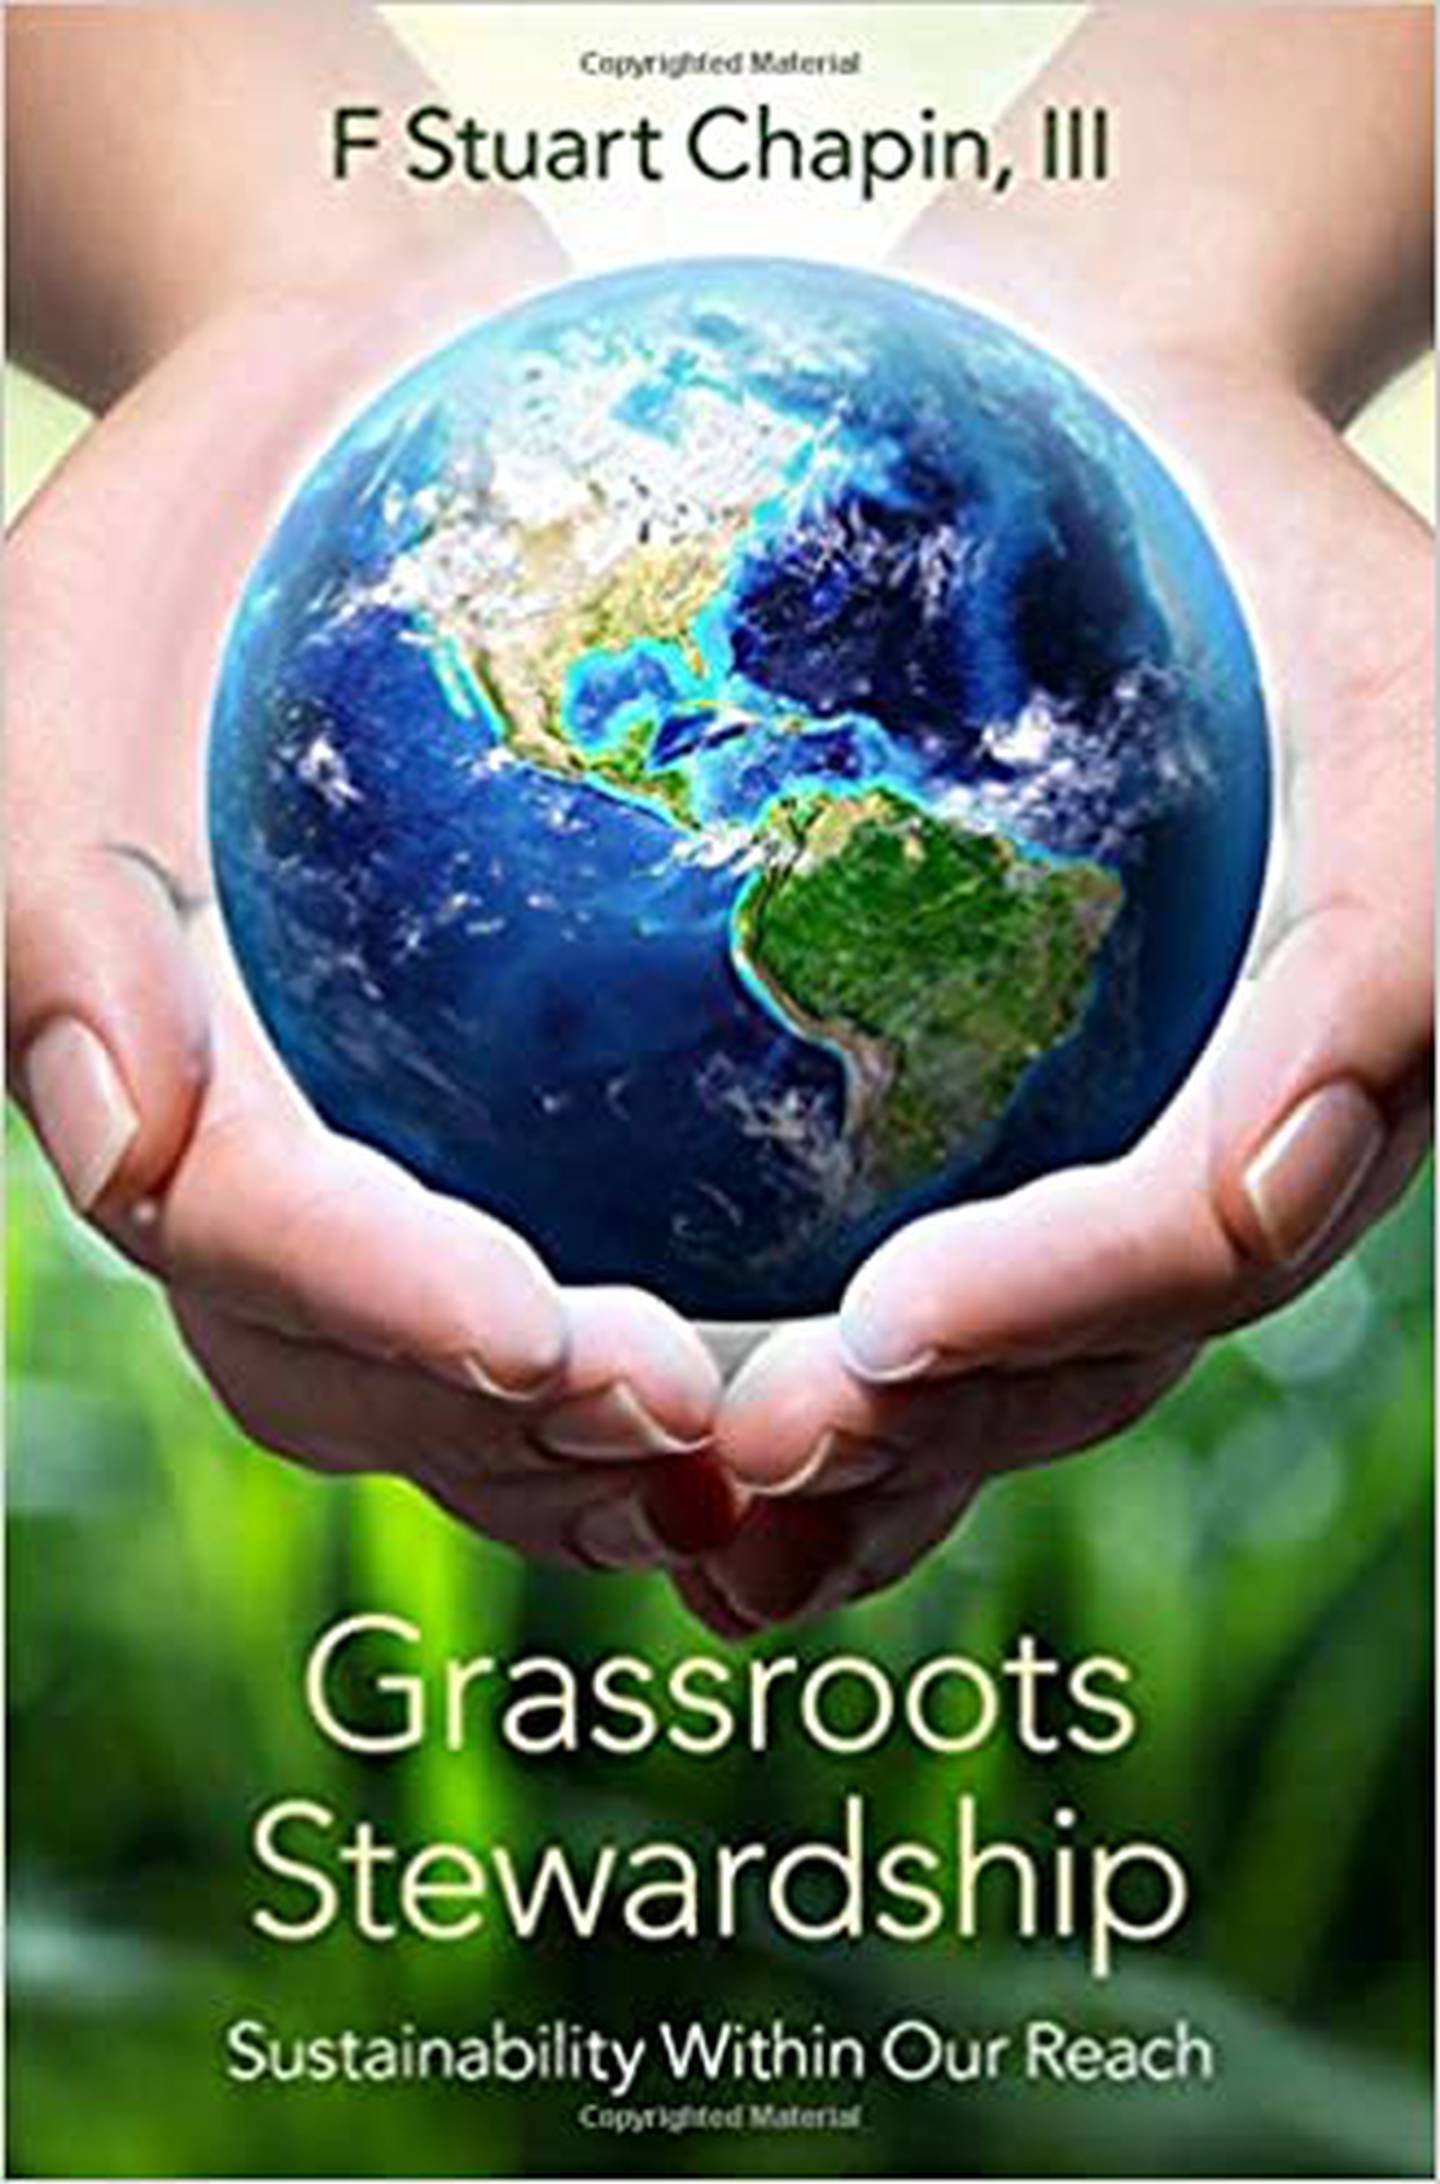 "Grassroots Stewardship: Sustainability Within Our Reach," by F Stuart Chapin III